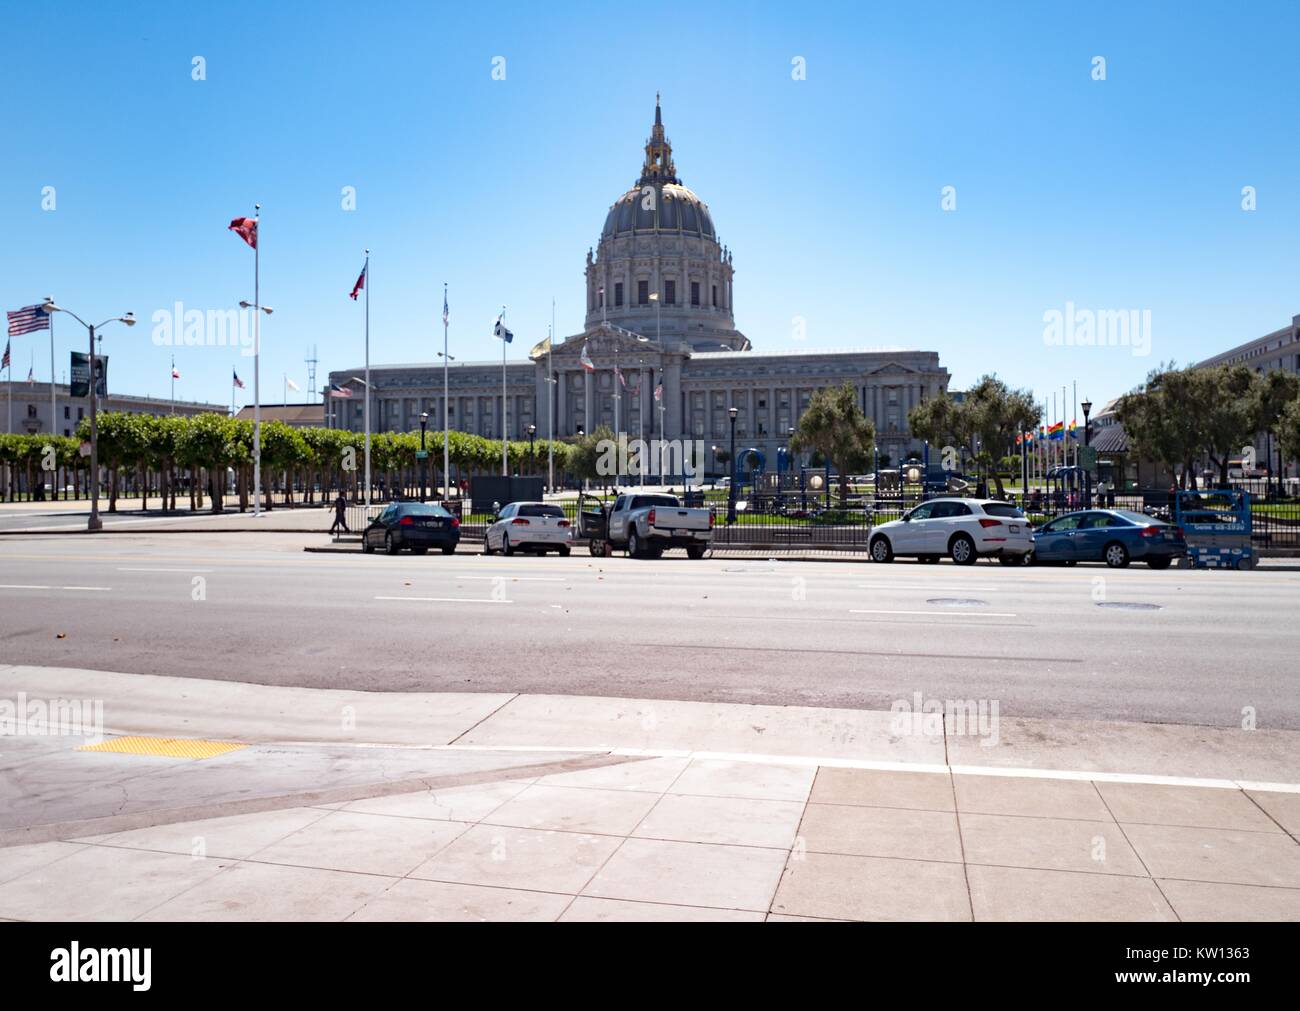 San Francisco city hall, with gay pride flags visible at right flying at half mast to honor victims of the June 2016 mass shooting in Orlando, in the Civic Center neighborhood of San Francisco, California, 2016. Stock Photo